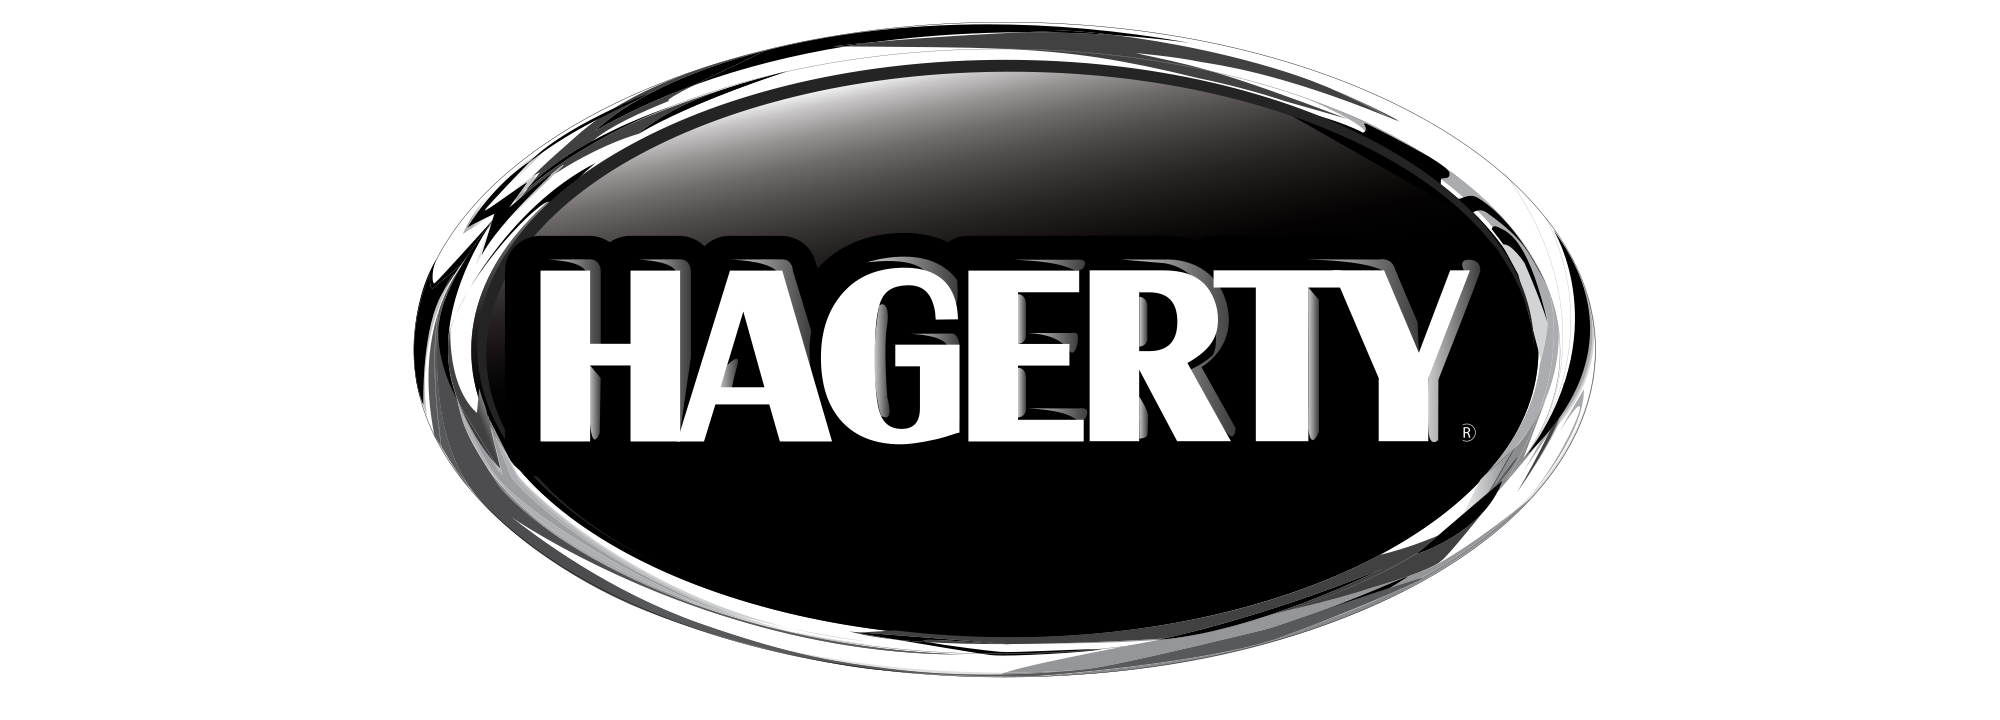 2000px-Hagerty_logo.svg_.png